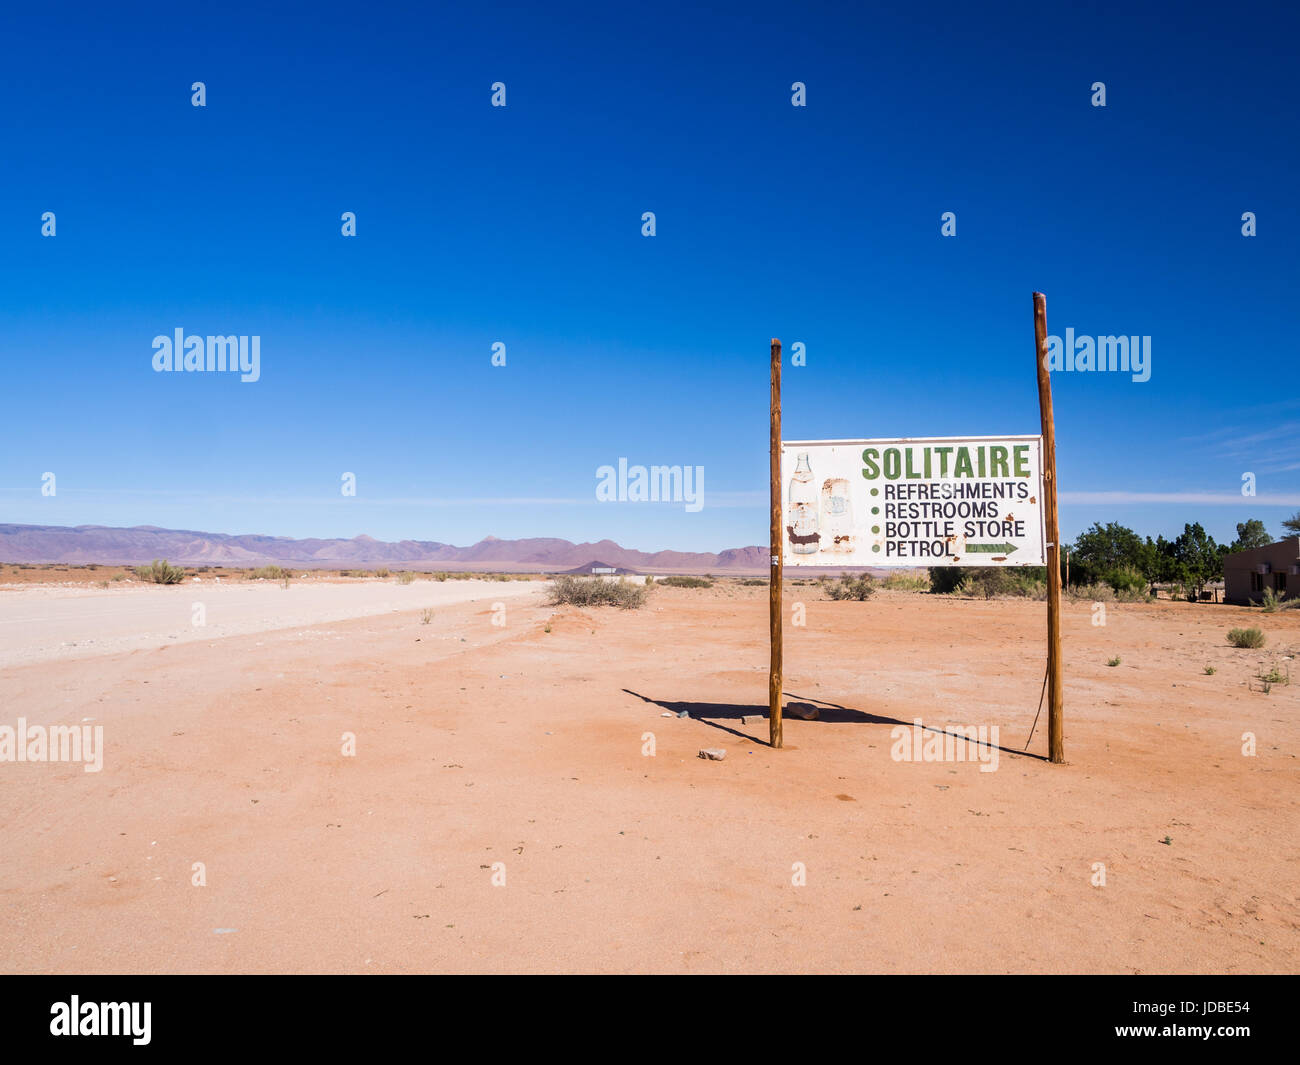 SOLITAIRE, NAMIBIA - JUNE 18, 2016: Banner welcoming people to Solitaire on the Namib Desert, Namibia. Stock Photo